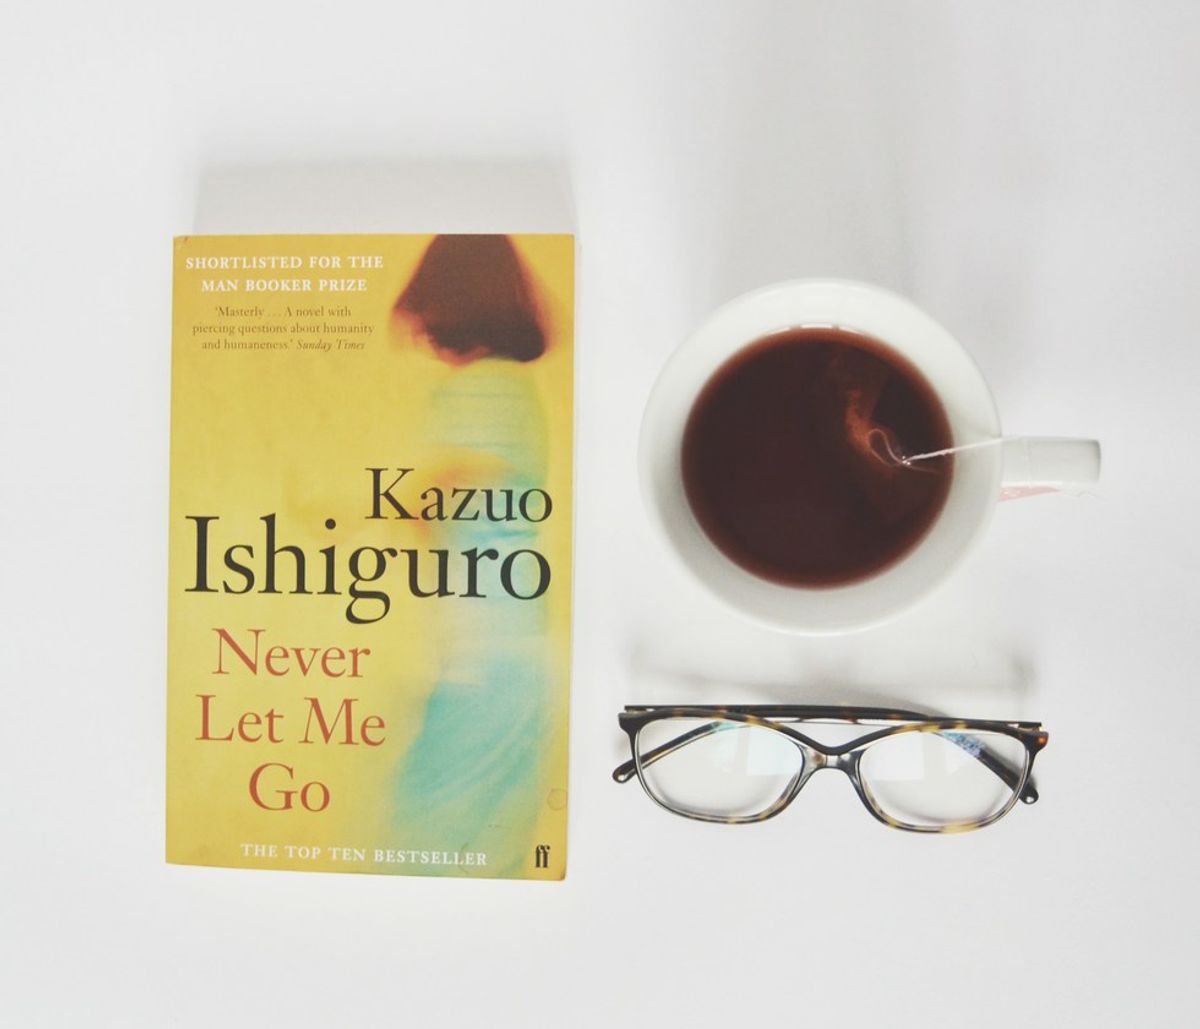 The Morality Of Human Consumption In Kazuo Ishiguro's "Never Let Me Go"